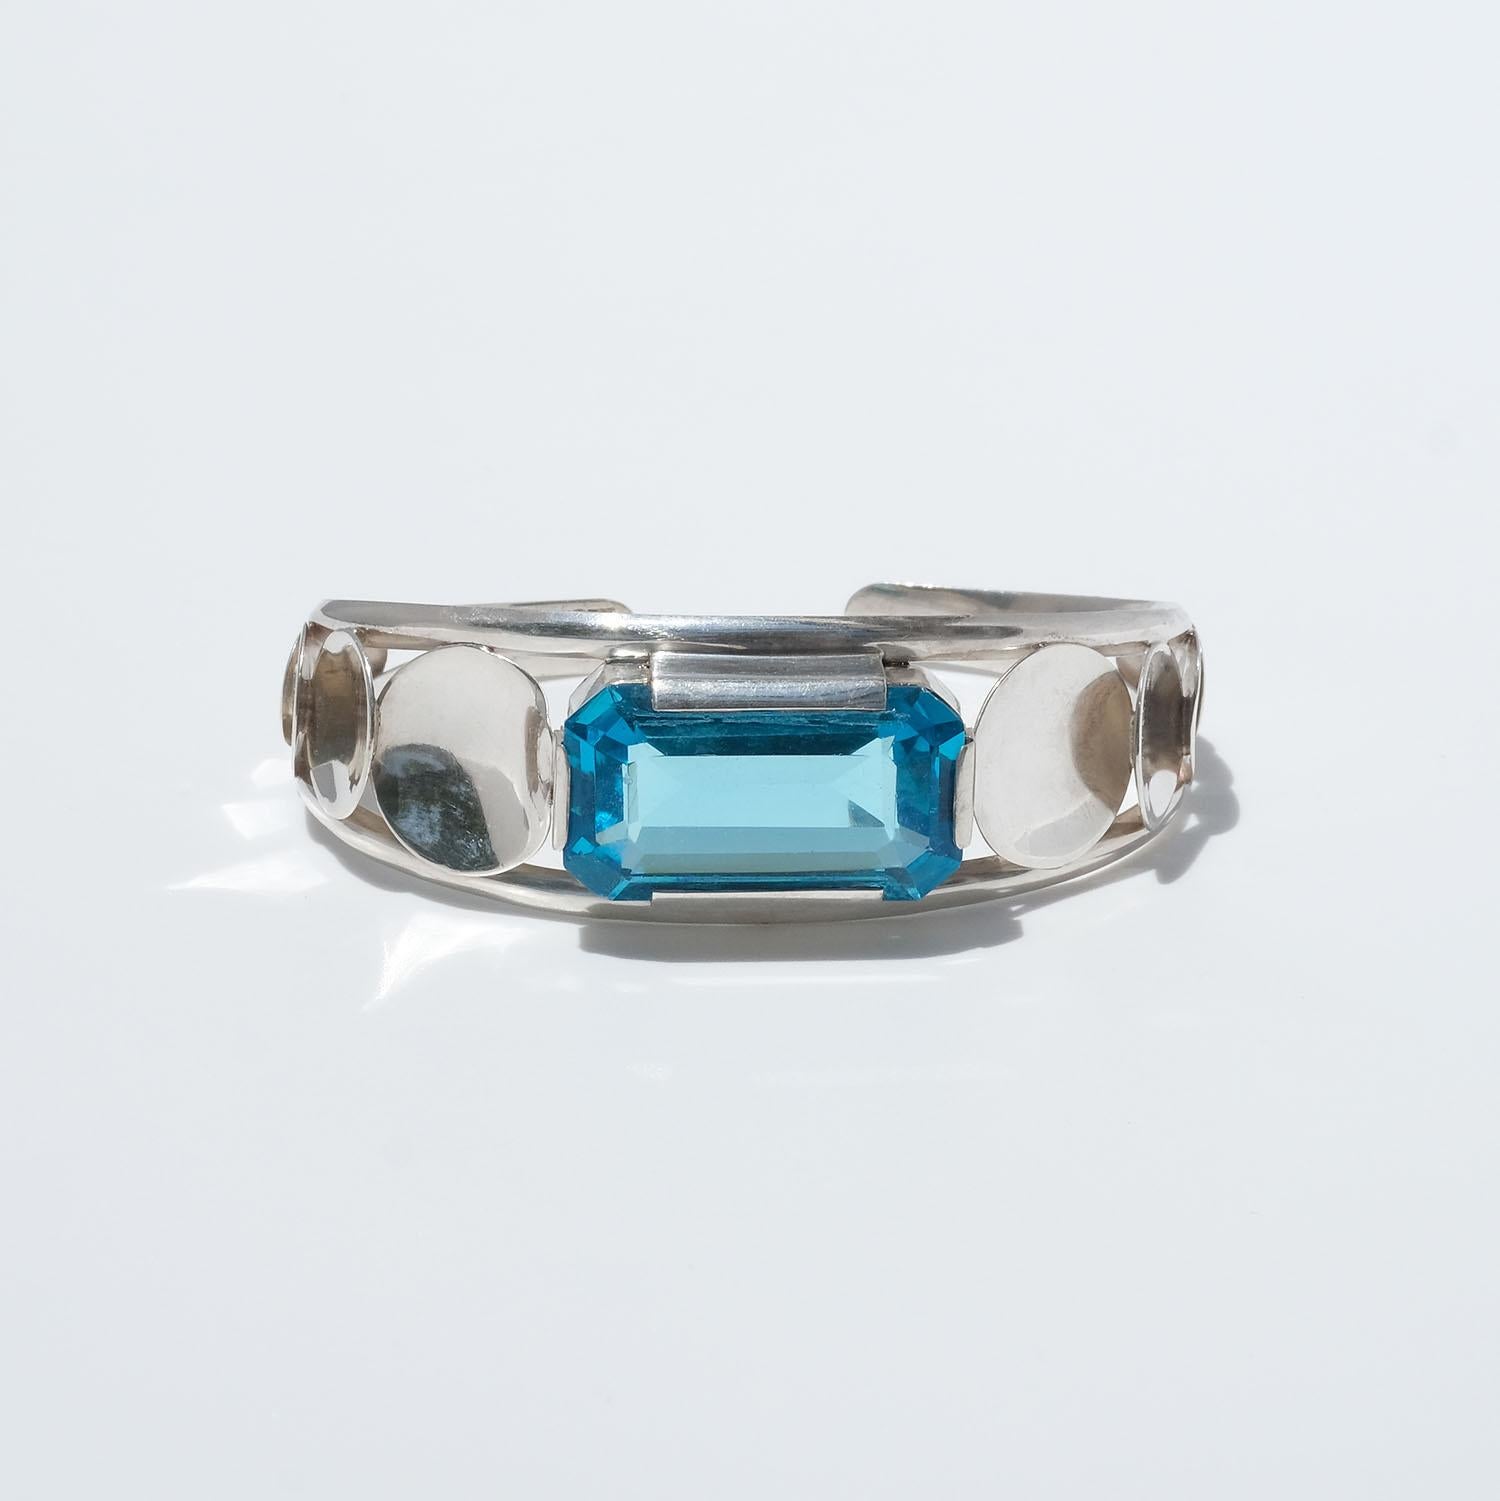 This silver cuff bracelet is adorned with a rectangular turquoise stone, and along its sides run round silver discs of various sizes.

The bracelet has a summery feeling and will be a perfect match to a classic summer-dress.

Dimensions: inner